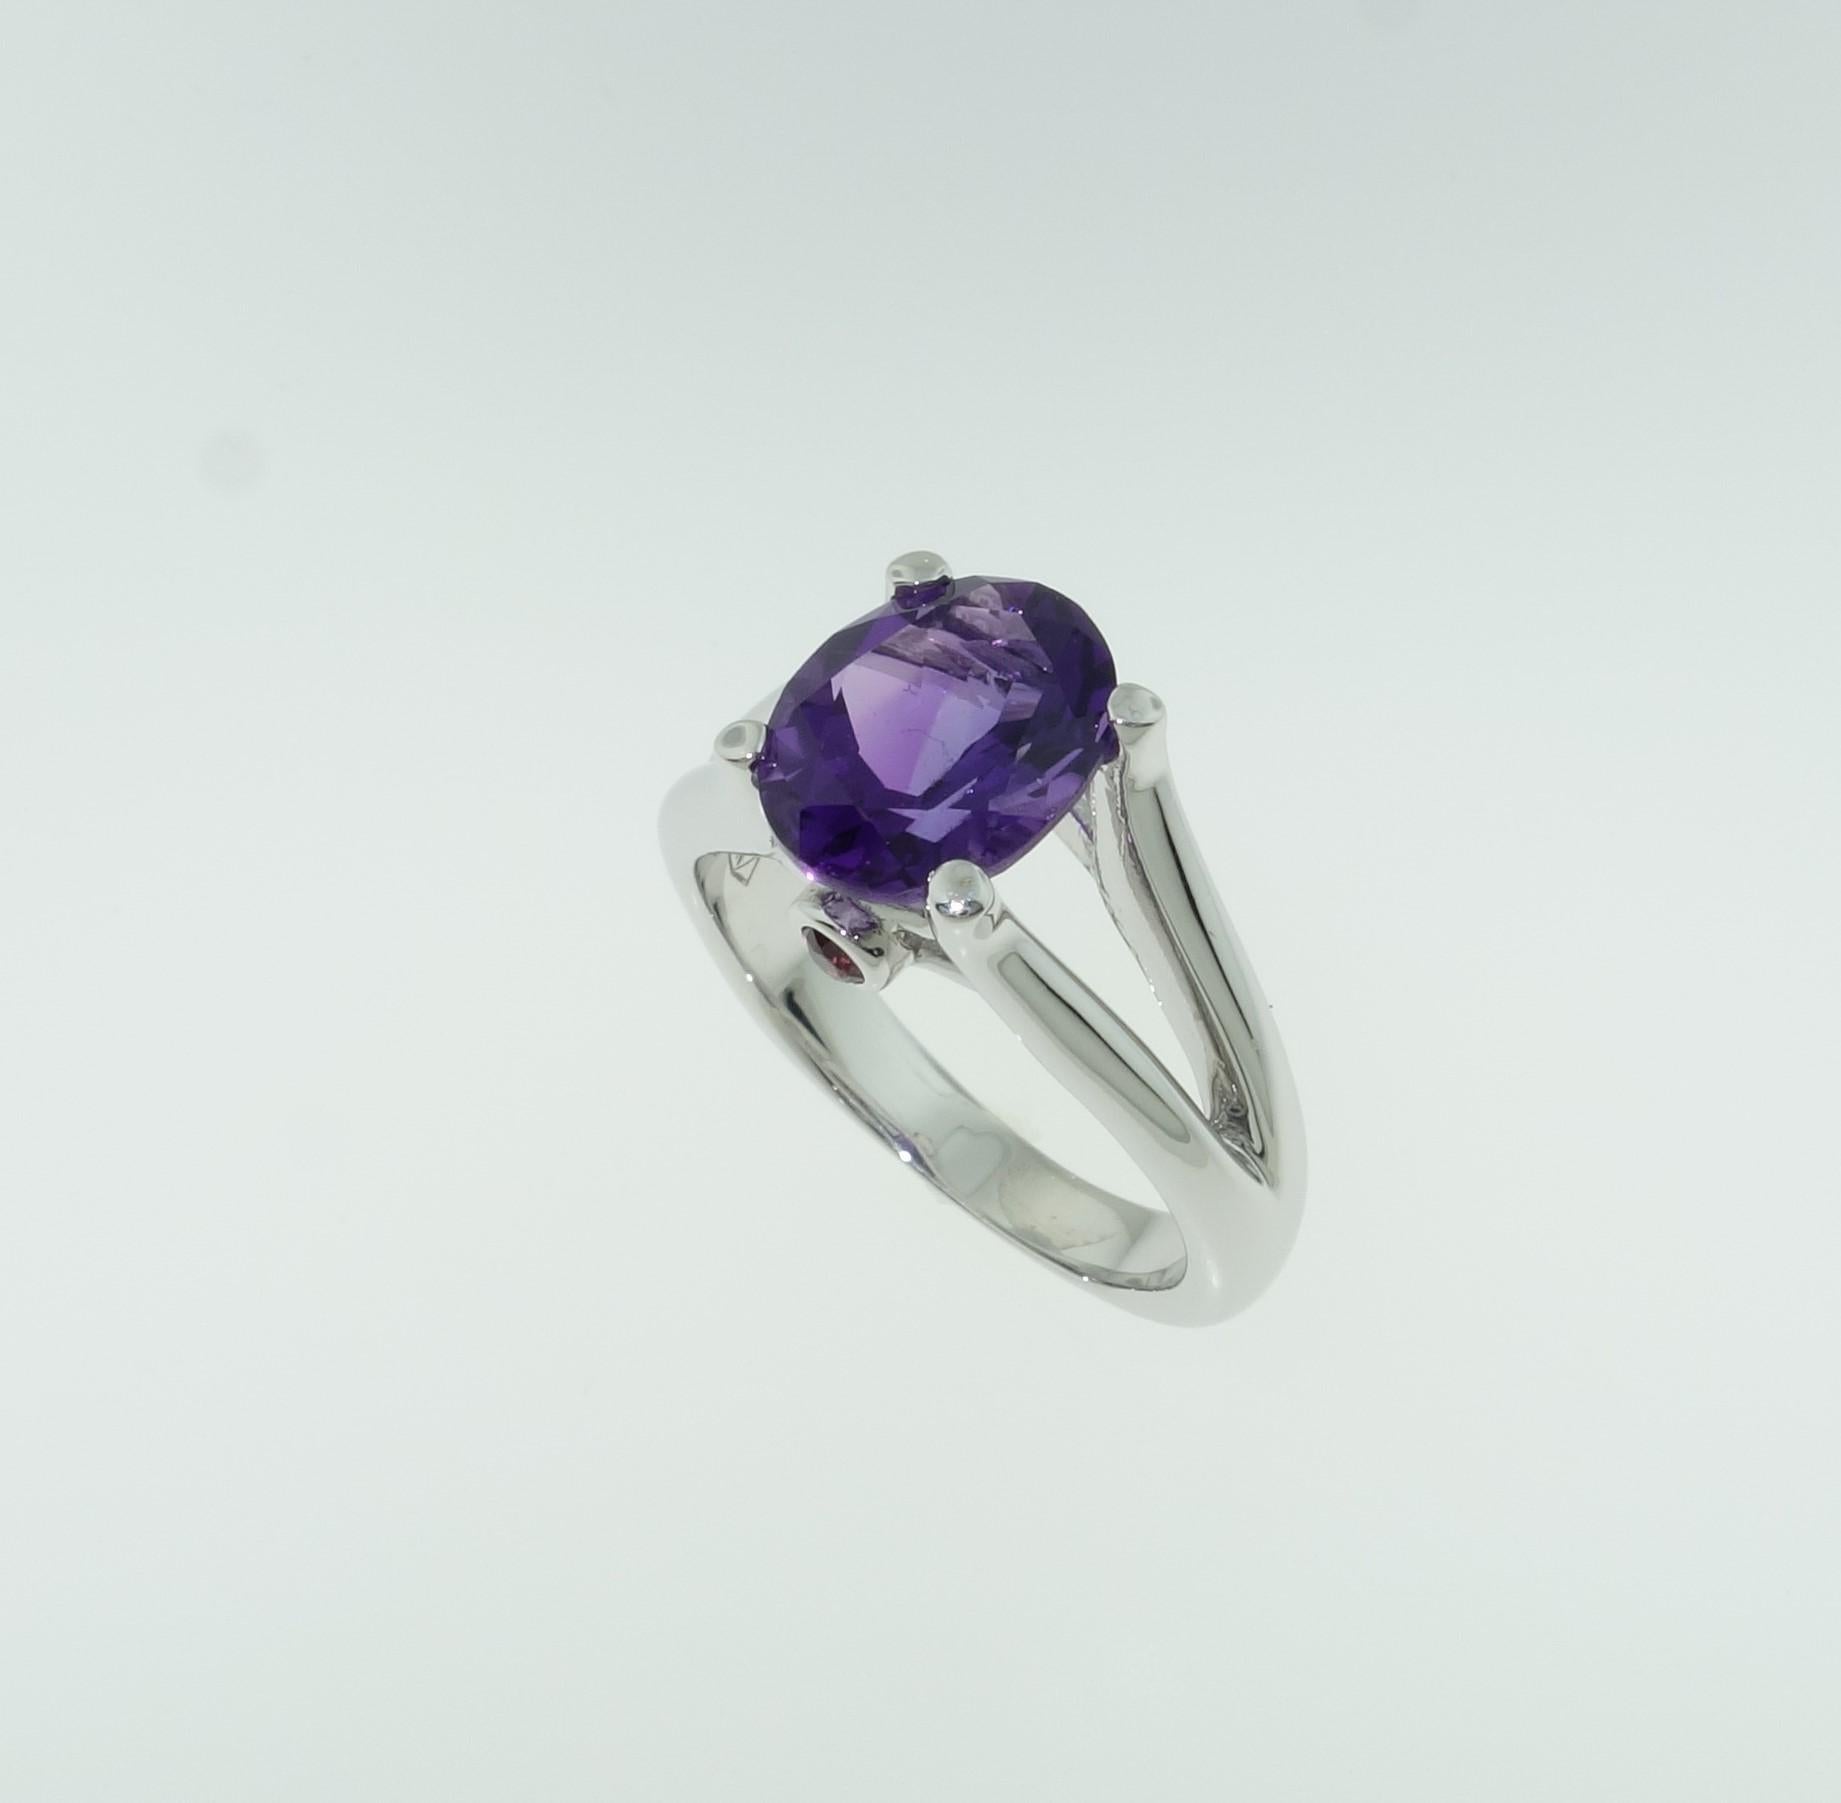 Beautiful ring featuring a 2.30 Carat oval Amethyst in center enhanced with Sapphires; approx. .07tctw; Sterling Silver Tarnish-resistant Rhodium mounting; Size 7, we offer ring re-sizing; Stylish and Classy…illuminating your look with Timeless